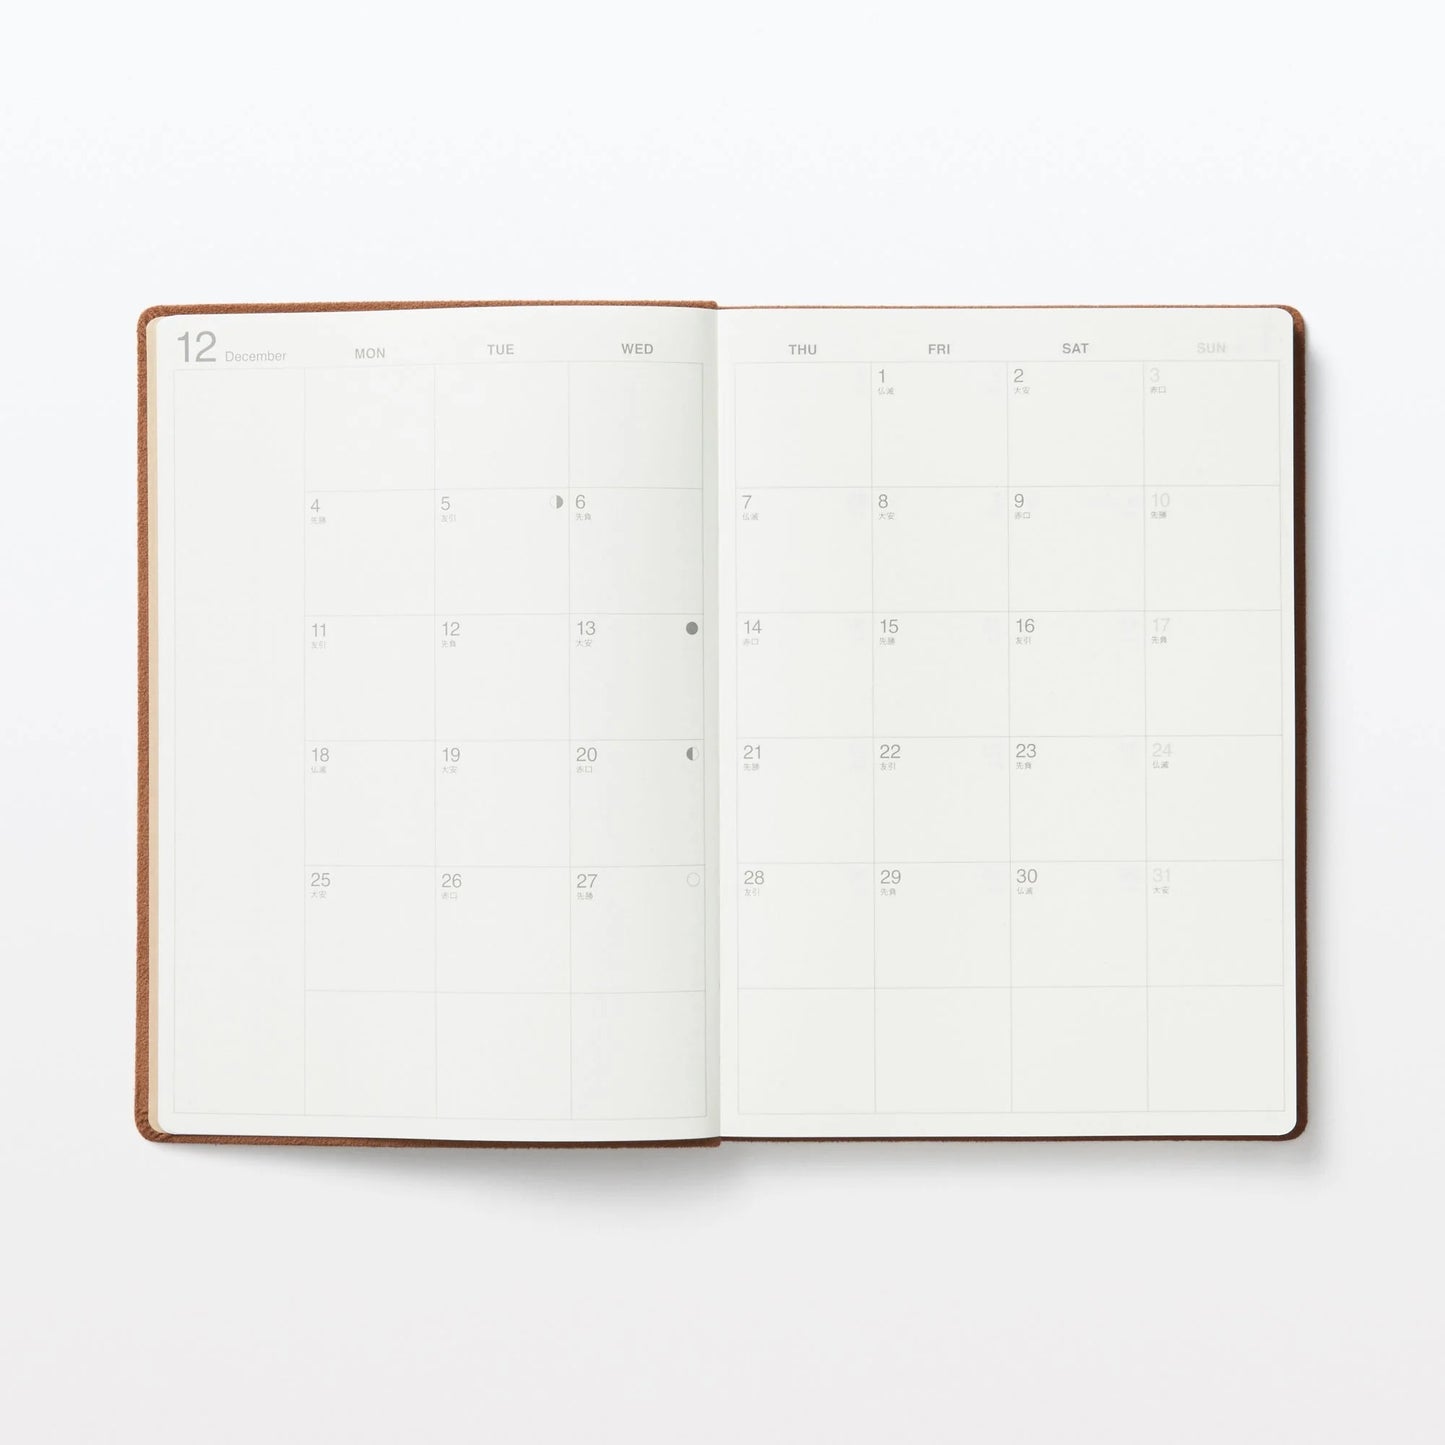 MUJI PLANNER A5 2024 - Faux Suede BEIGE (December 2023 to 2024) NEW - USA SHIP